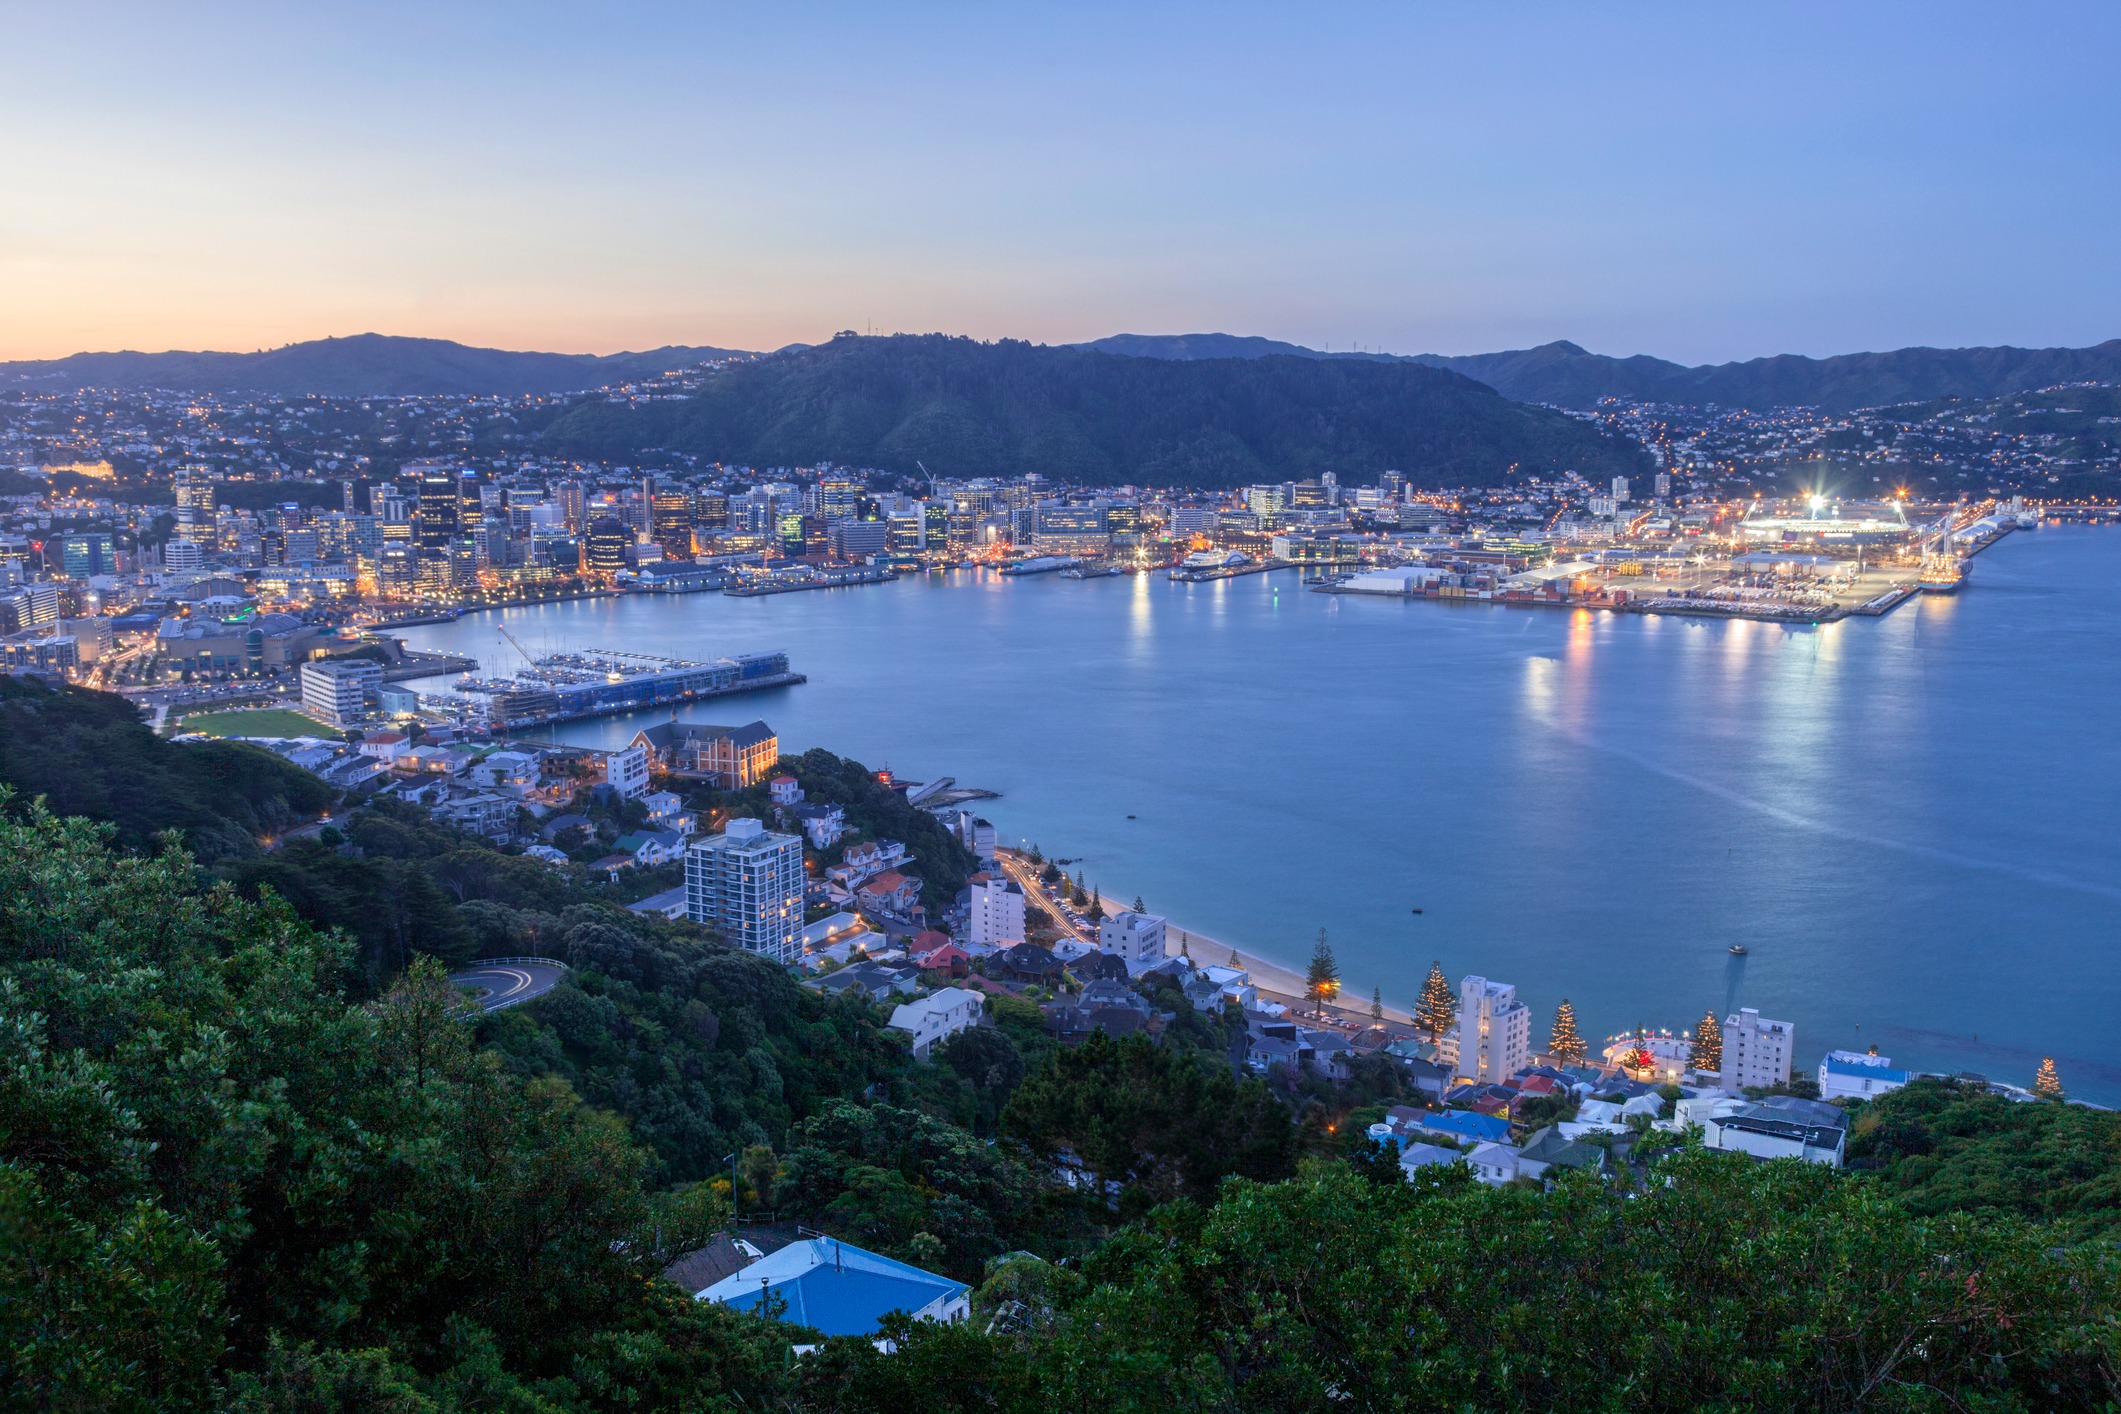 An aerial shot of Wellington Harbour from Mount Victoria, featuring blue waters and lively city life